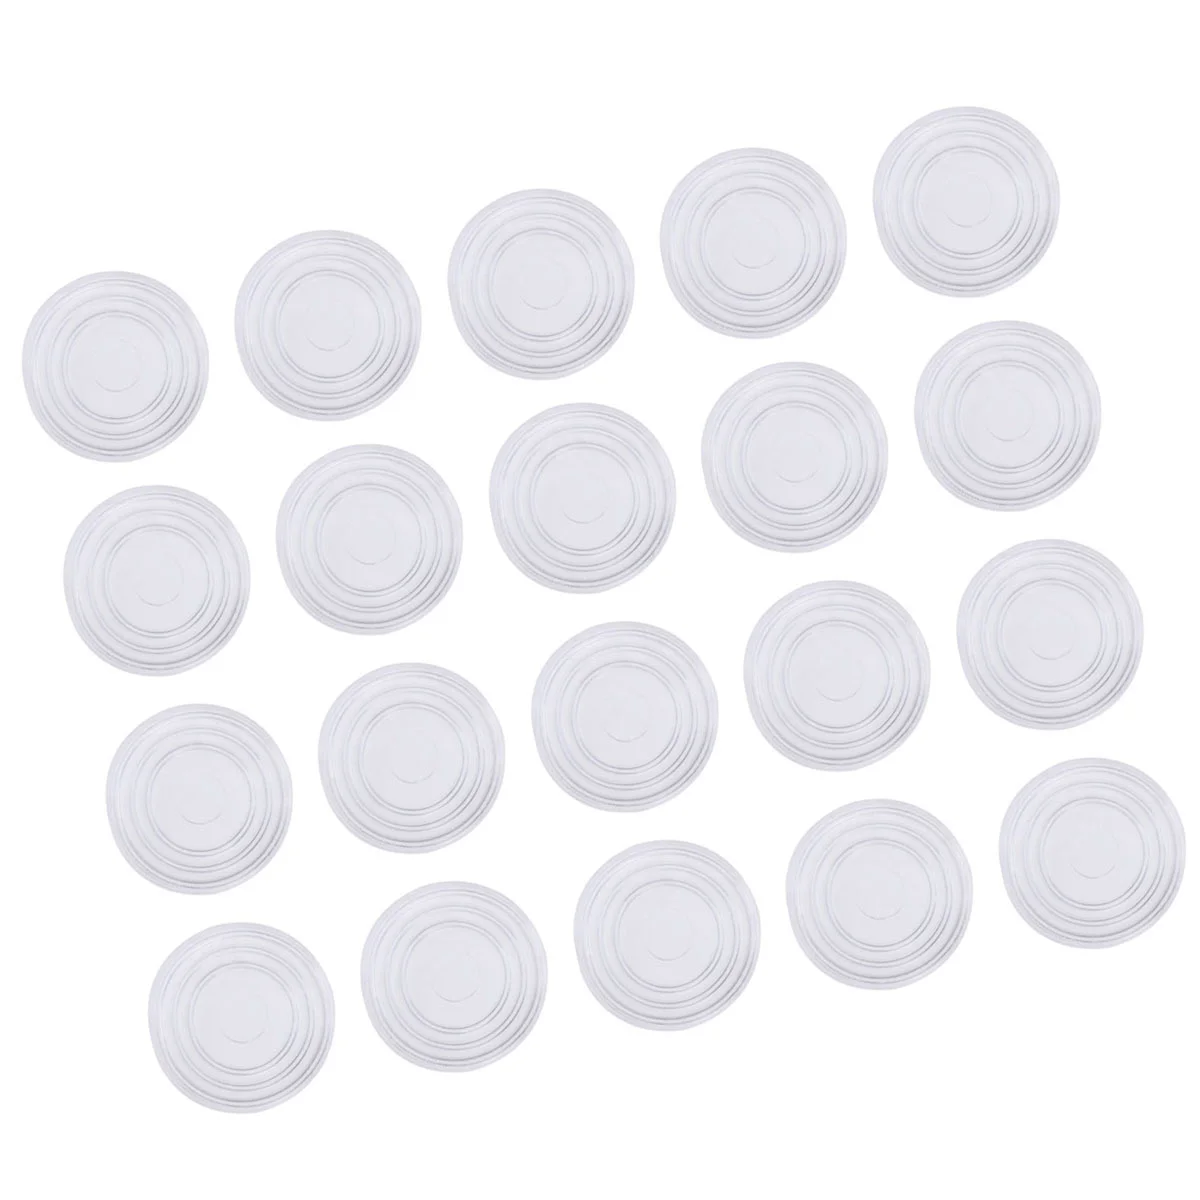 

18 Furniture Bumpers Round Glass Table Pads Clear Adhesive Bumper Pads Round Shape Non Grip Pads Glass TableRubber Legs for